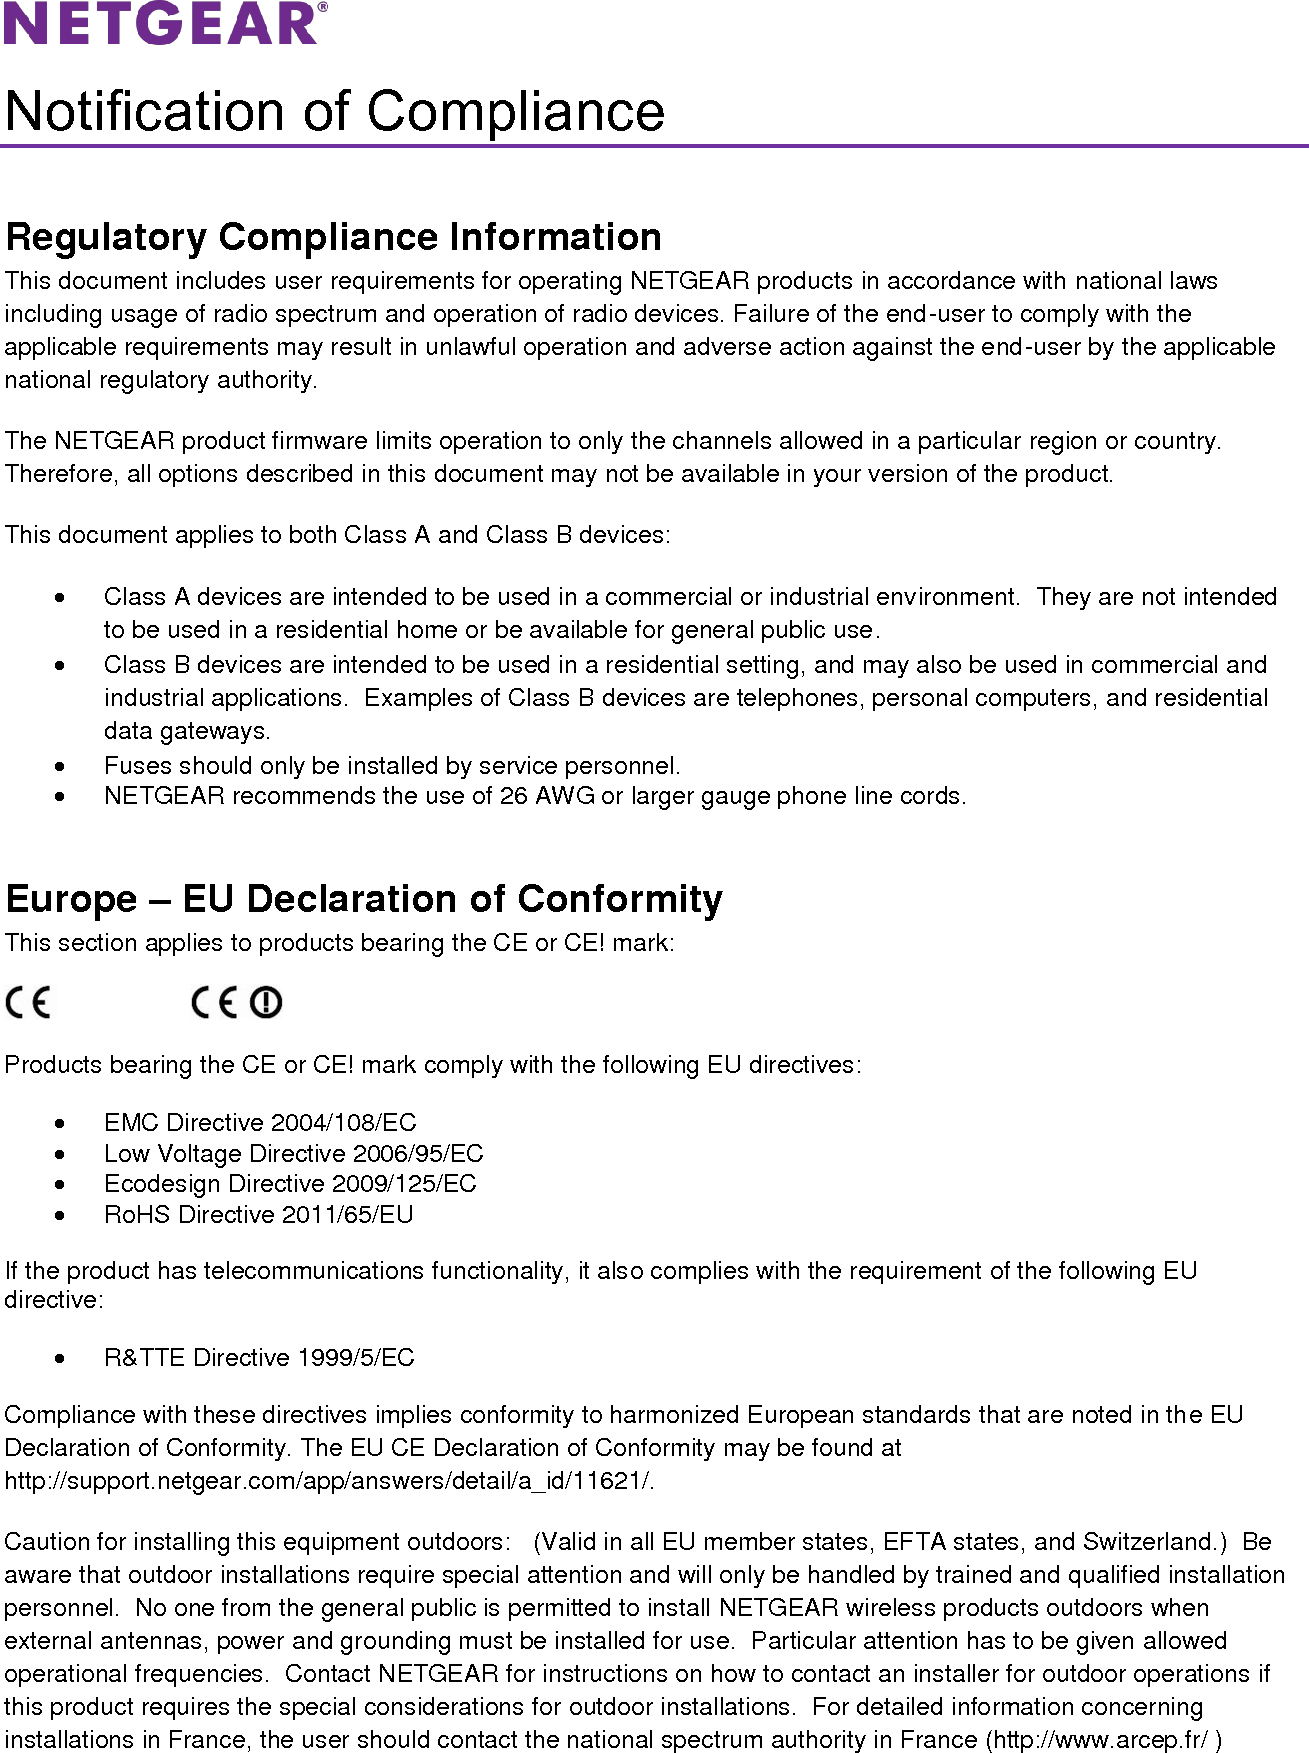   Notification of Compliance Regulatory Compliance Information This document includes user requirements for operating NETGEAR products in accordance with national laws including usage of radio spectrum and operation of radio devices. Failure of the end-user to comply with the applicable requirements may result in unlawful operation and adverse action against the end-user by the applicable national regulatory authority. The NETGEAR product firmware limits operation to only the channels allowed in a particular region or country. Therefore, all options described in this document may not be available in your version of the product. This document applies to both Class A and Class B devices:   Class A devices are intended to be used in a commercial or industrial environment.  They are not intended to be used in a residential home or be available for general public use.   Class B devices are intended to be used in a residential setting, and may also be used in commercial and industrial applications.  Examples of Class B devices are telephones, personal computers, and residential data gateways.   Fuses should only be installed by service personnel.   NETGEAR recommends the use of 26 AWG or larger gauge phone line cords. Europe – EU Declaration of Conformity This section applies to products bearing the CE or CE! mark:                      Products bearing the CE or CE! mark comply with the following EU directives:   EMC Directive 2004/108/EC   Low Voltage Directive 2006/95/EC   Ecodesign Directive 2009/125/EC   RoHS Directive 2011/65/EU If the product has telecommunications functionality, it also complies with the requirement of the following EU directive:   R&amp;TTE Directive 1999/5/EC Compliance with these directives implies conformity to harmonized European standards that are noted in the EU Declaration of Conformity. The EU CE Declaration of Conformity may be found at http://support.netgear.com/app/answers/detail/a_id/11621/. Caution for installing this equipment outdoors:   (Valid in all EU member states, EFTA states, and Switzerland.)  Be aware that outdoor installations require special attention and will only be handled by trained and qualified installation personnel.  No one from the general public is permitted to install NETGEAR wireless products outdoors when external antennas, power and grounding must be installed for use.  Particular attention has to be given allowed operational frequencies.  Contact NETGEAR for instructions on how to contact an installer for outdoor operations if this product requires the special considerations for outdoor installations.  For detailed information concerning installations in France, the user should contact the national spectrum authority in France (http://www.arcep.fr/ ) 